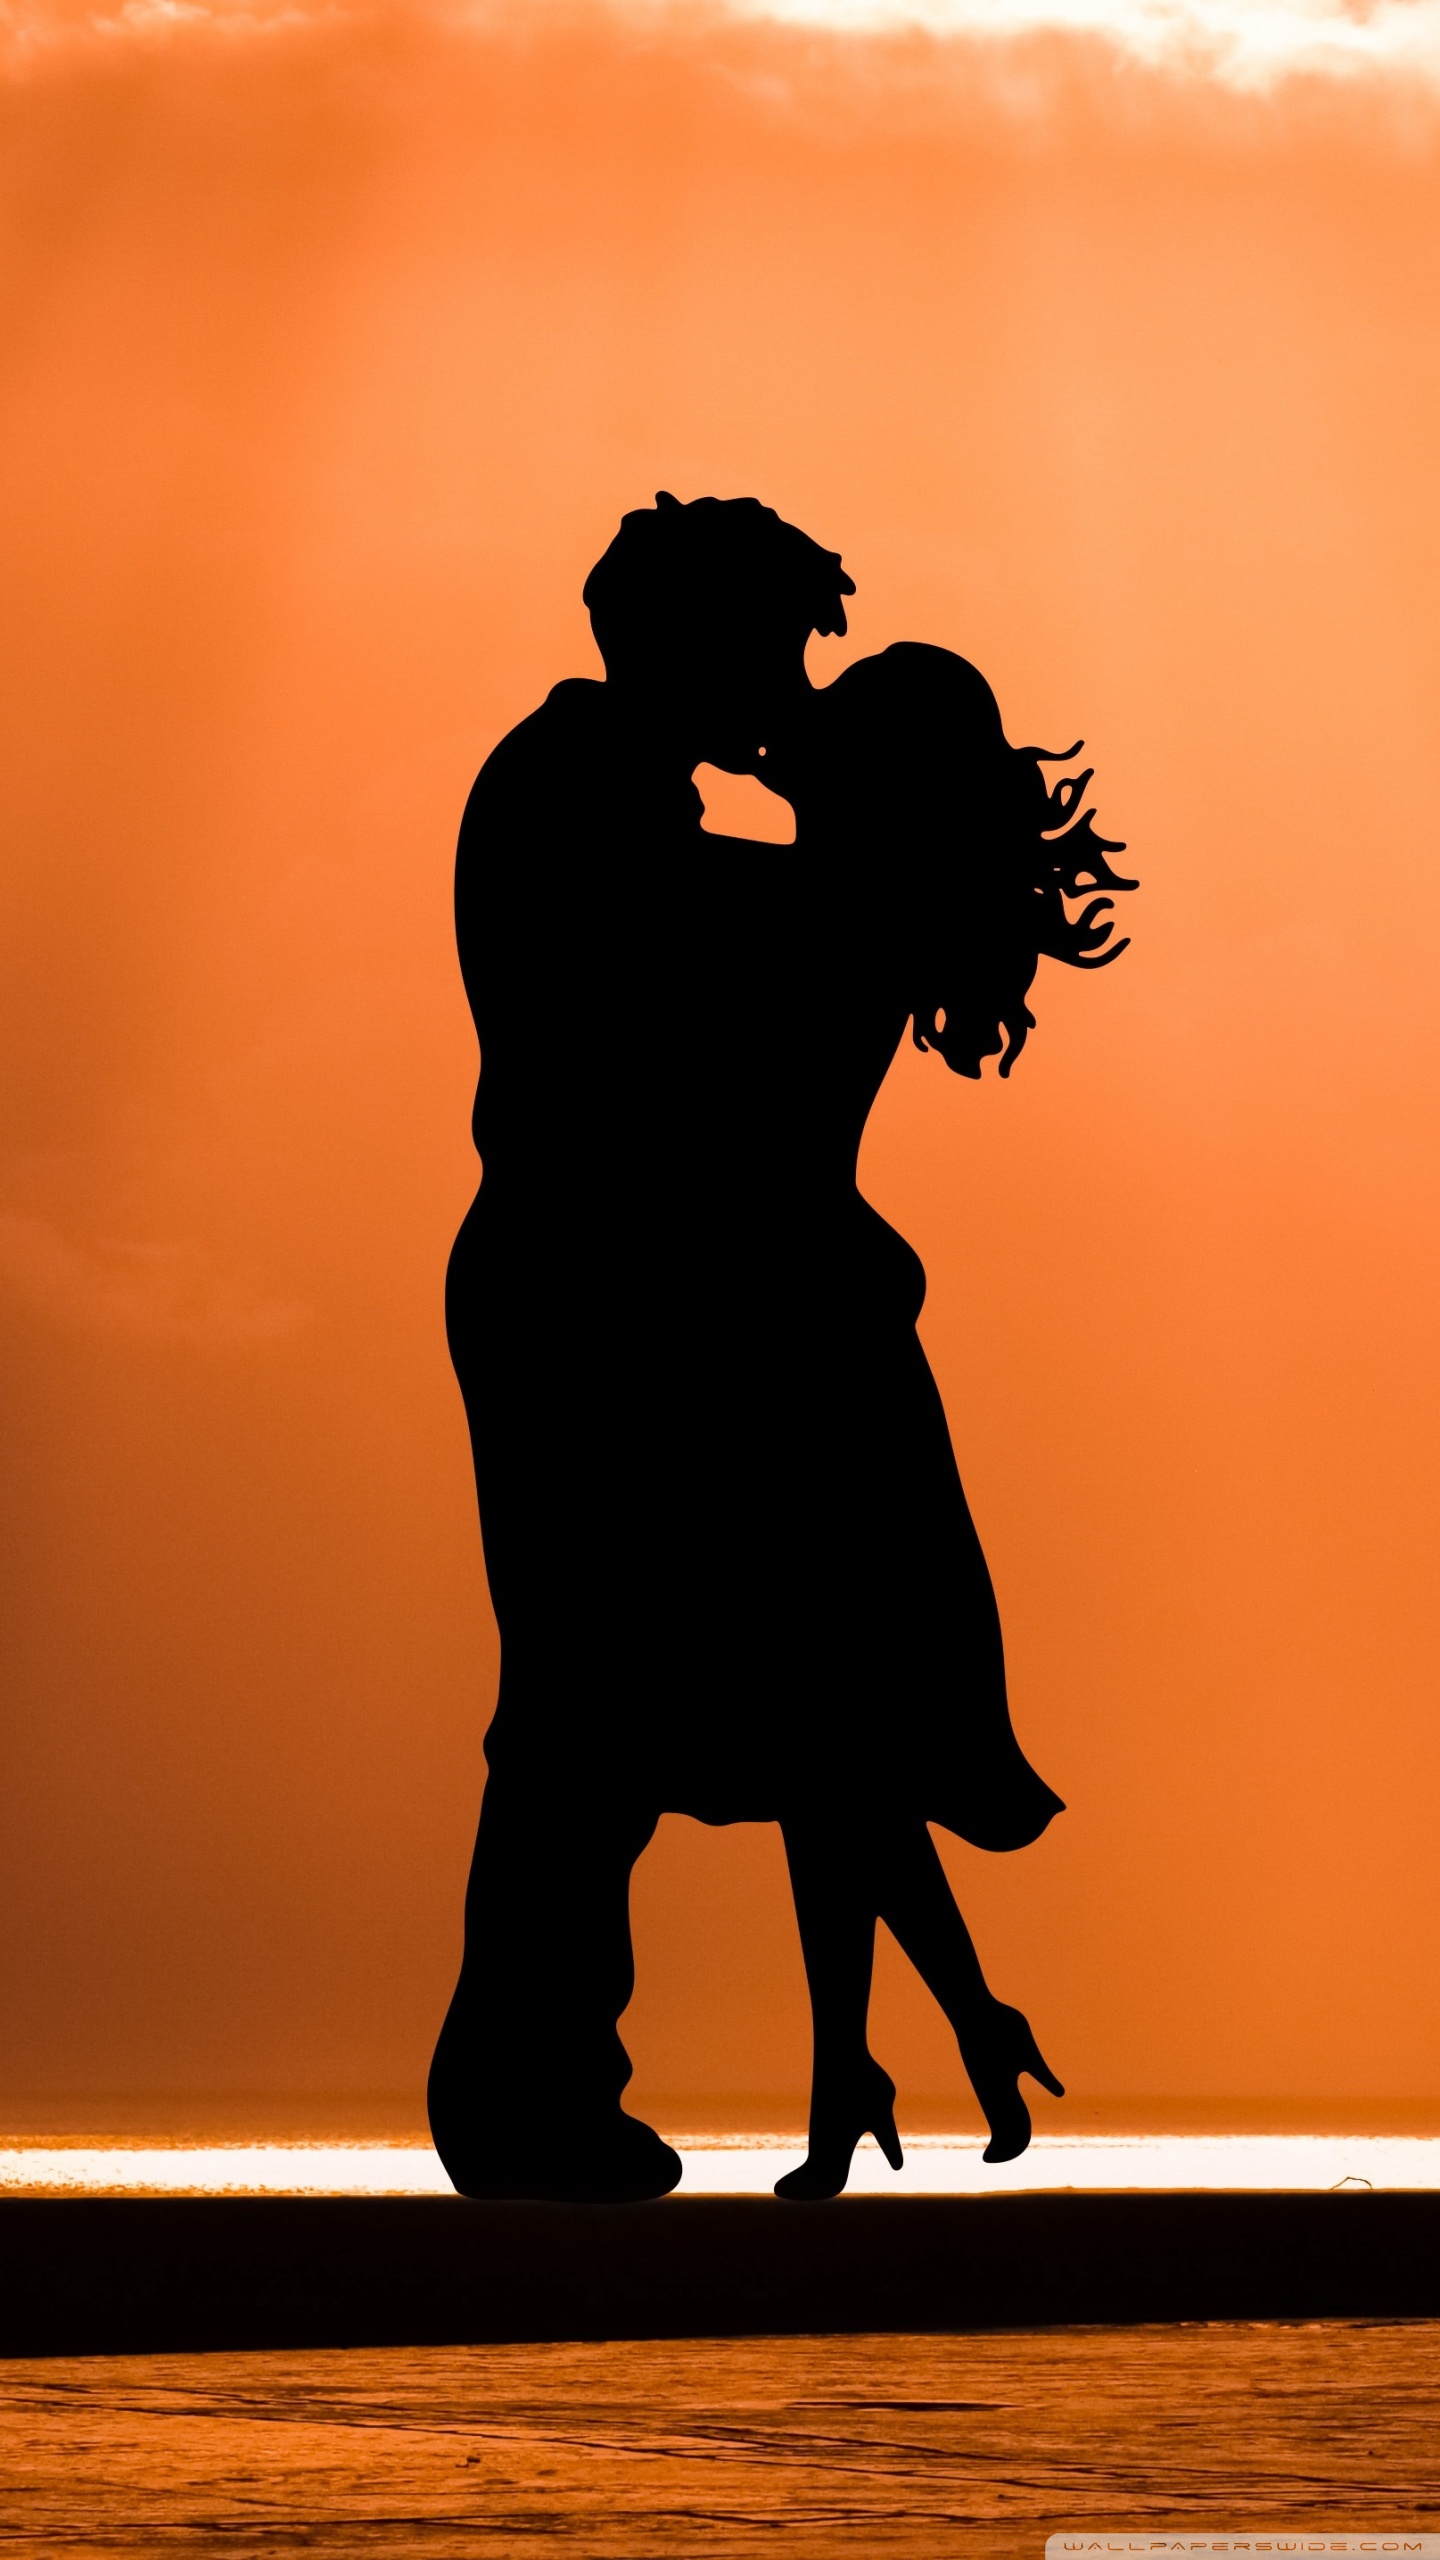 hd love couple wallpapers for mobile,romance,silhouette,dance,tango,love